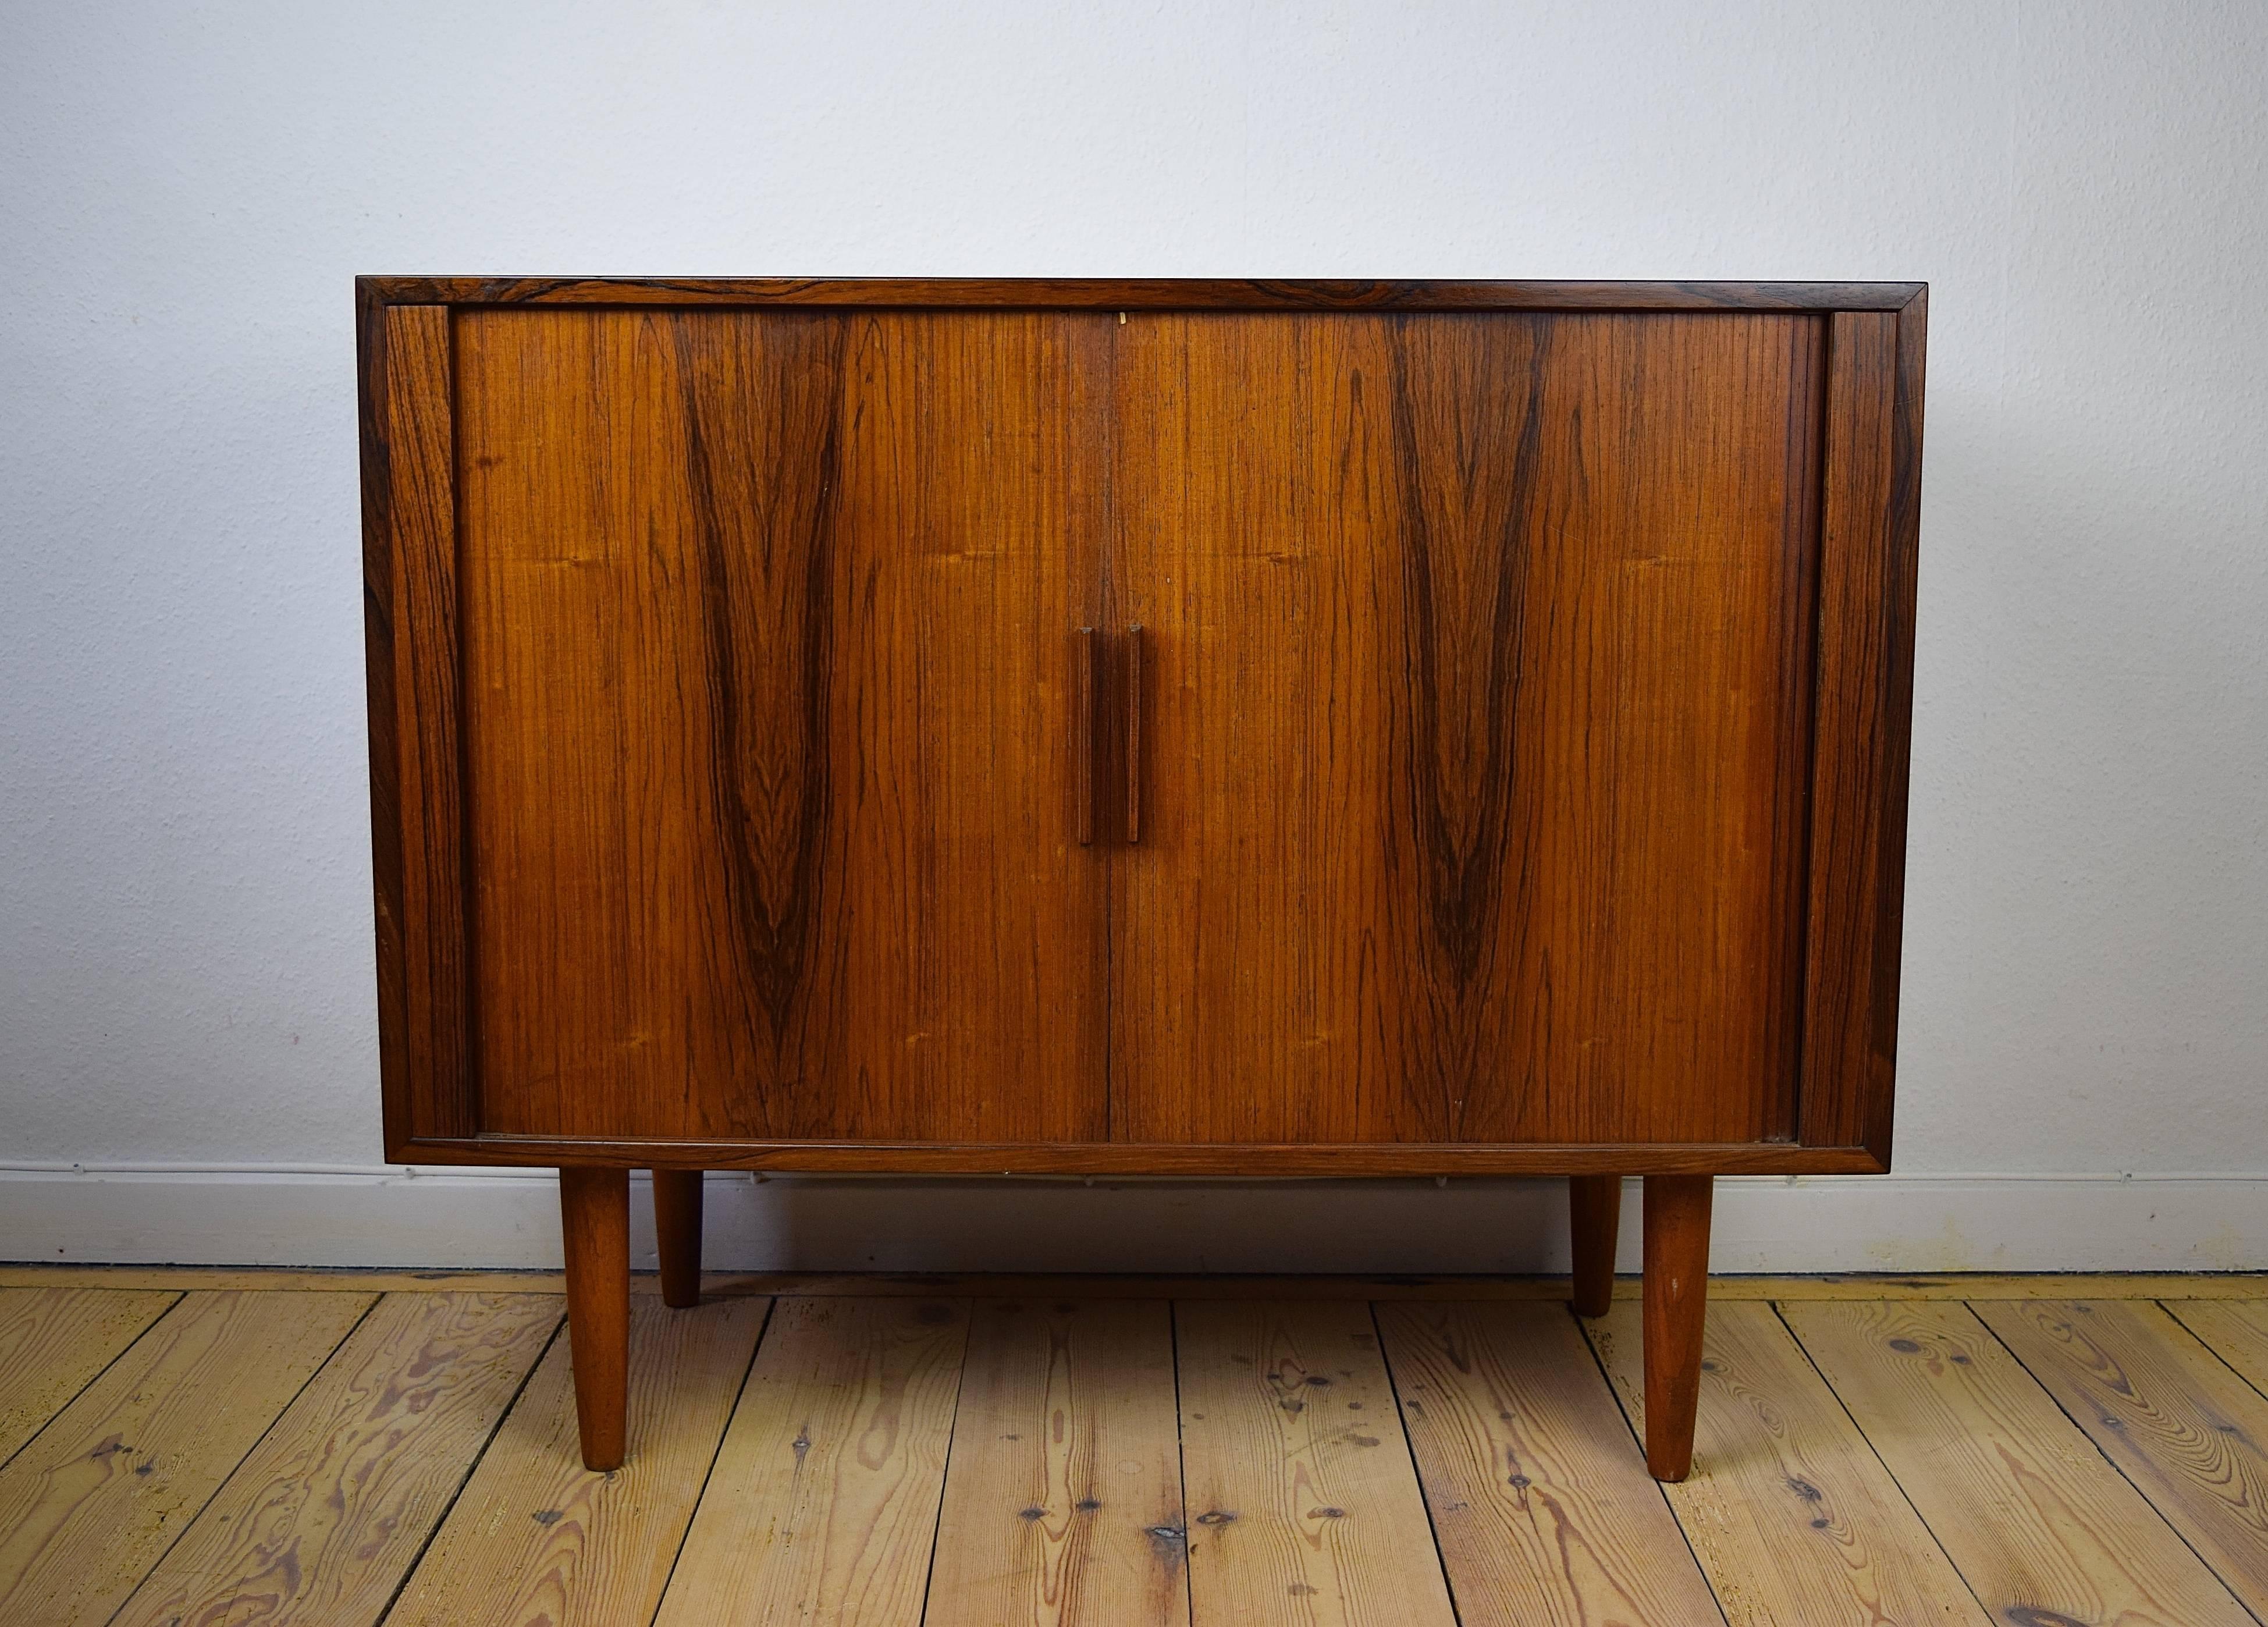 This rosewood cabinet was designed by Kai Kristiansen and manufactured in Denmark by Feldballes Møbelfabrik in 1960. It features tambour doors with two internal removable compartments and space for vinyl records.